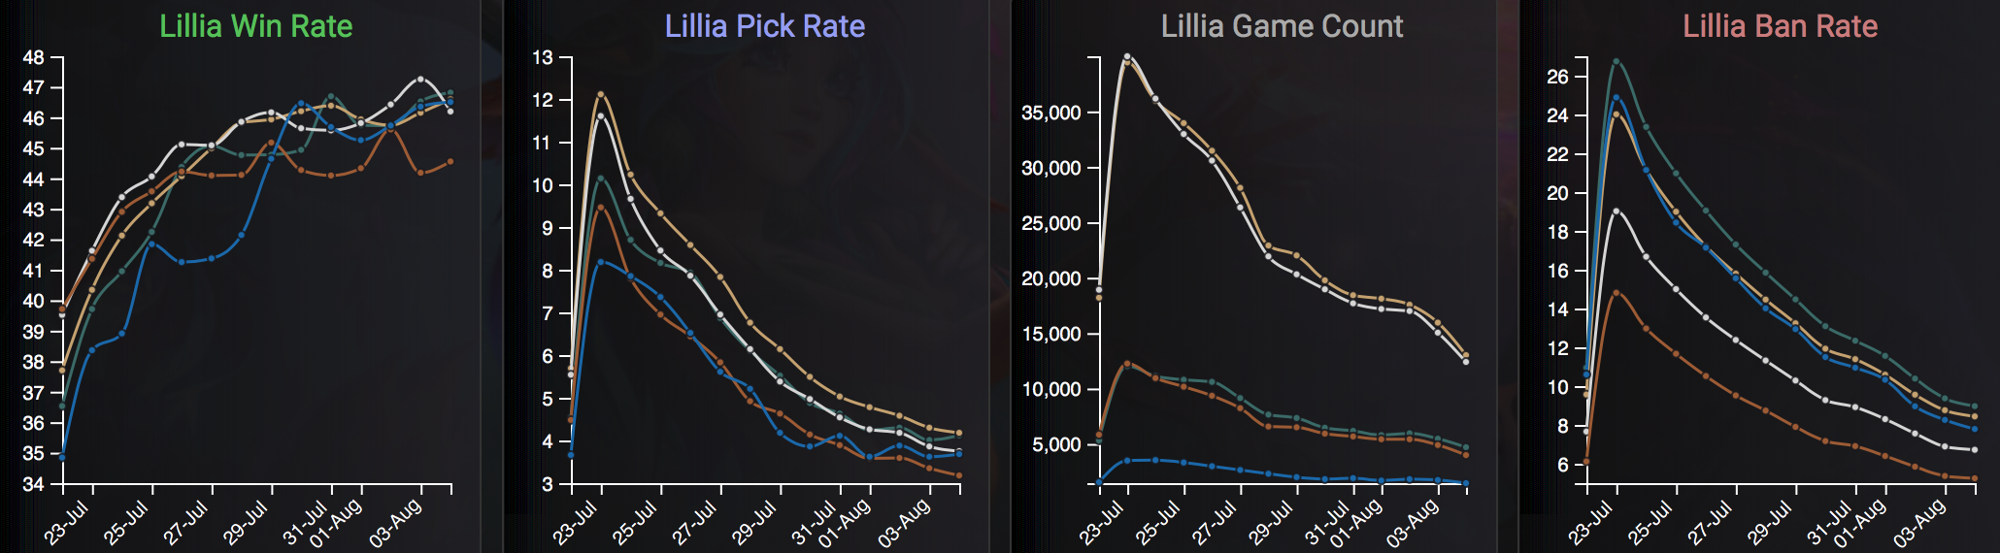 Is there a place for Lillia in the current meta?